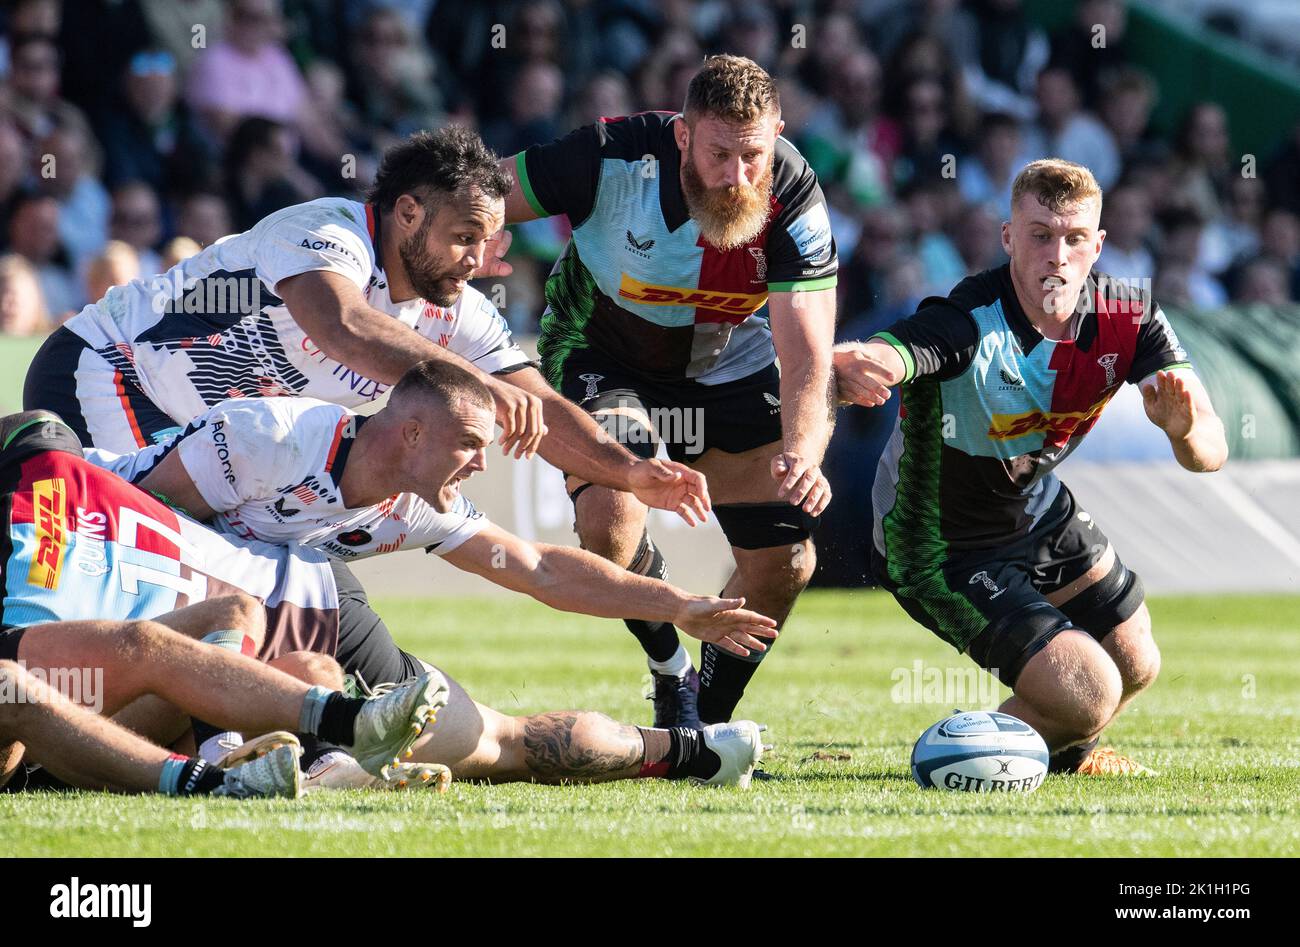 Billy Vunipola, Ben Earl and Irne Herbst scrambling for the ball during the Gallagher Premiership Rugby match between Harlequins and Saracens at Twick Stock Photo